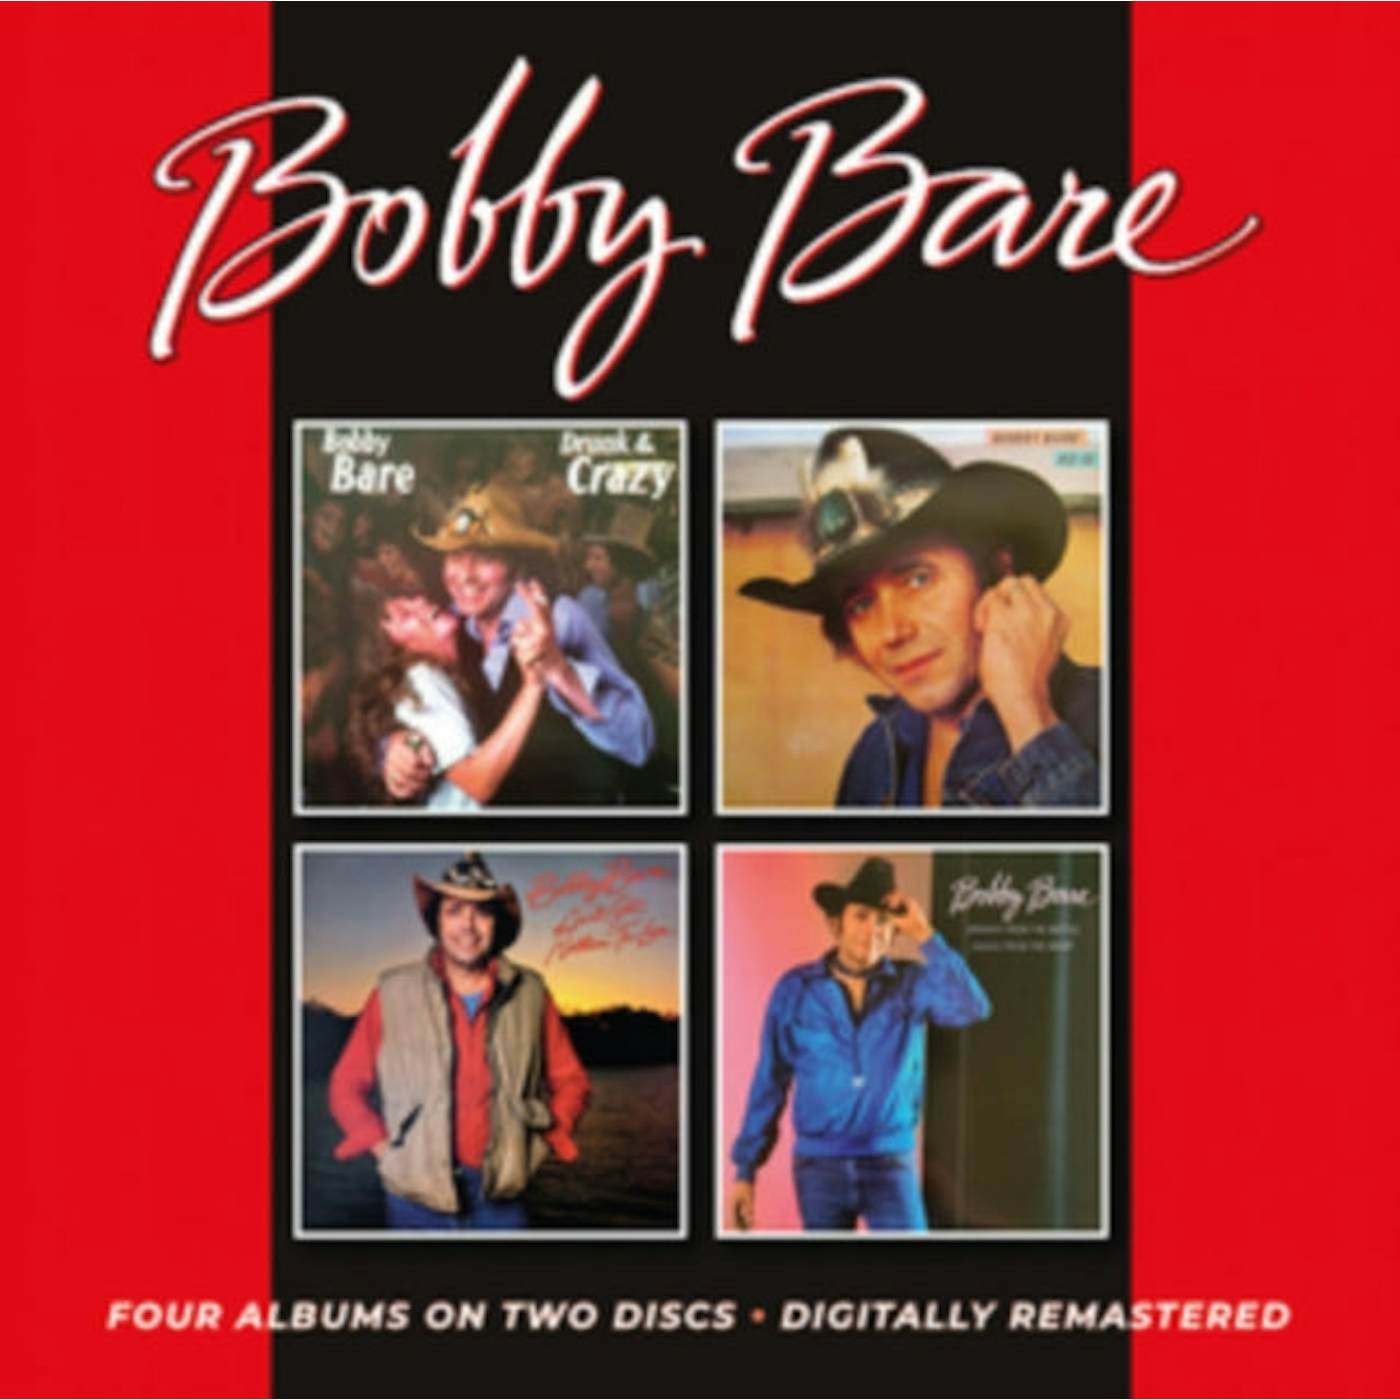 Bobby Bare CD - Drunk & Crazy / As Is / Ain't Got Nothin' To Lose / Drinkin' From The Bottle. Singin' From The Heart